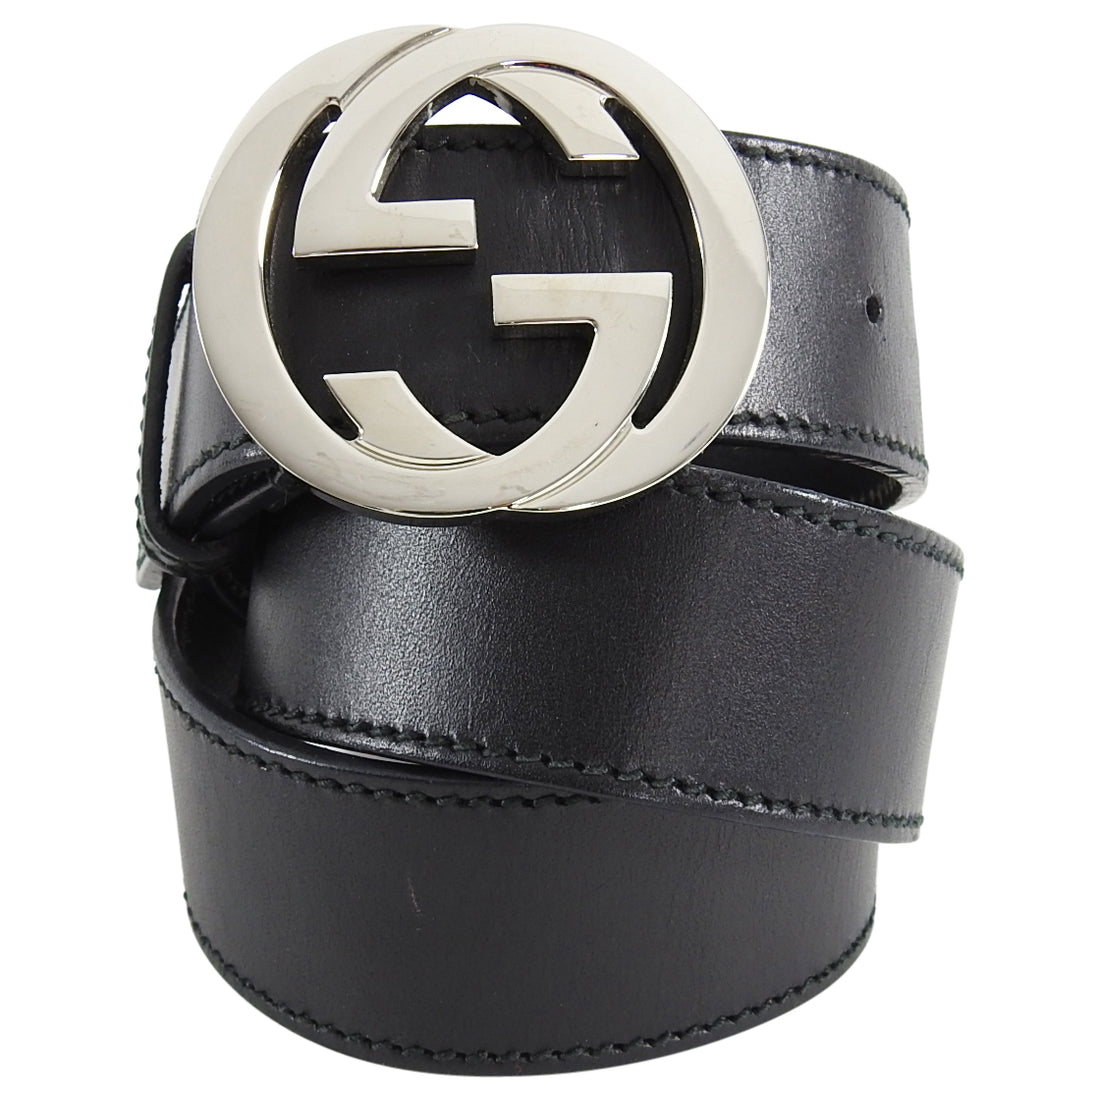 Gucci Black Belt with Silver GG Buckle 